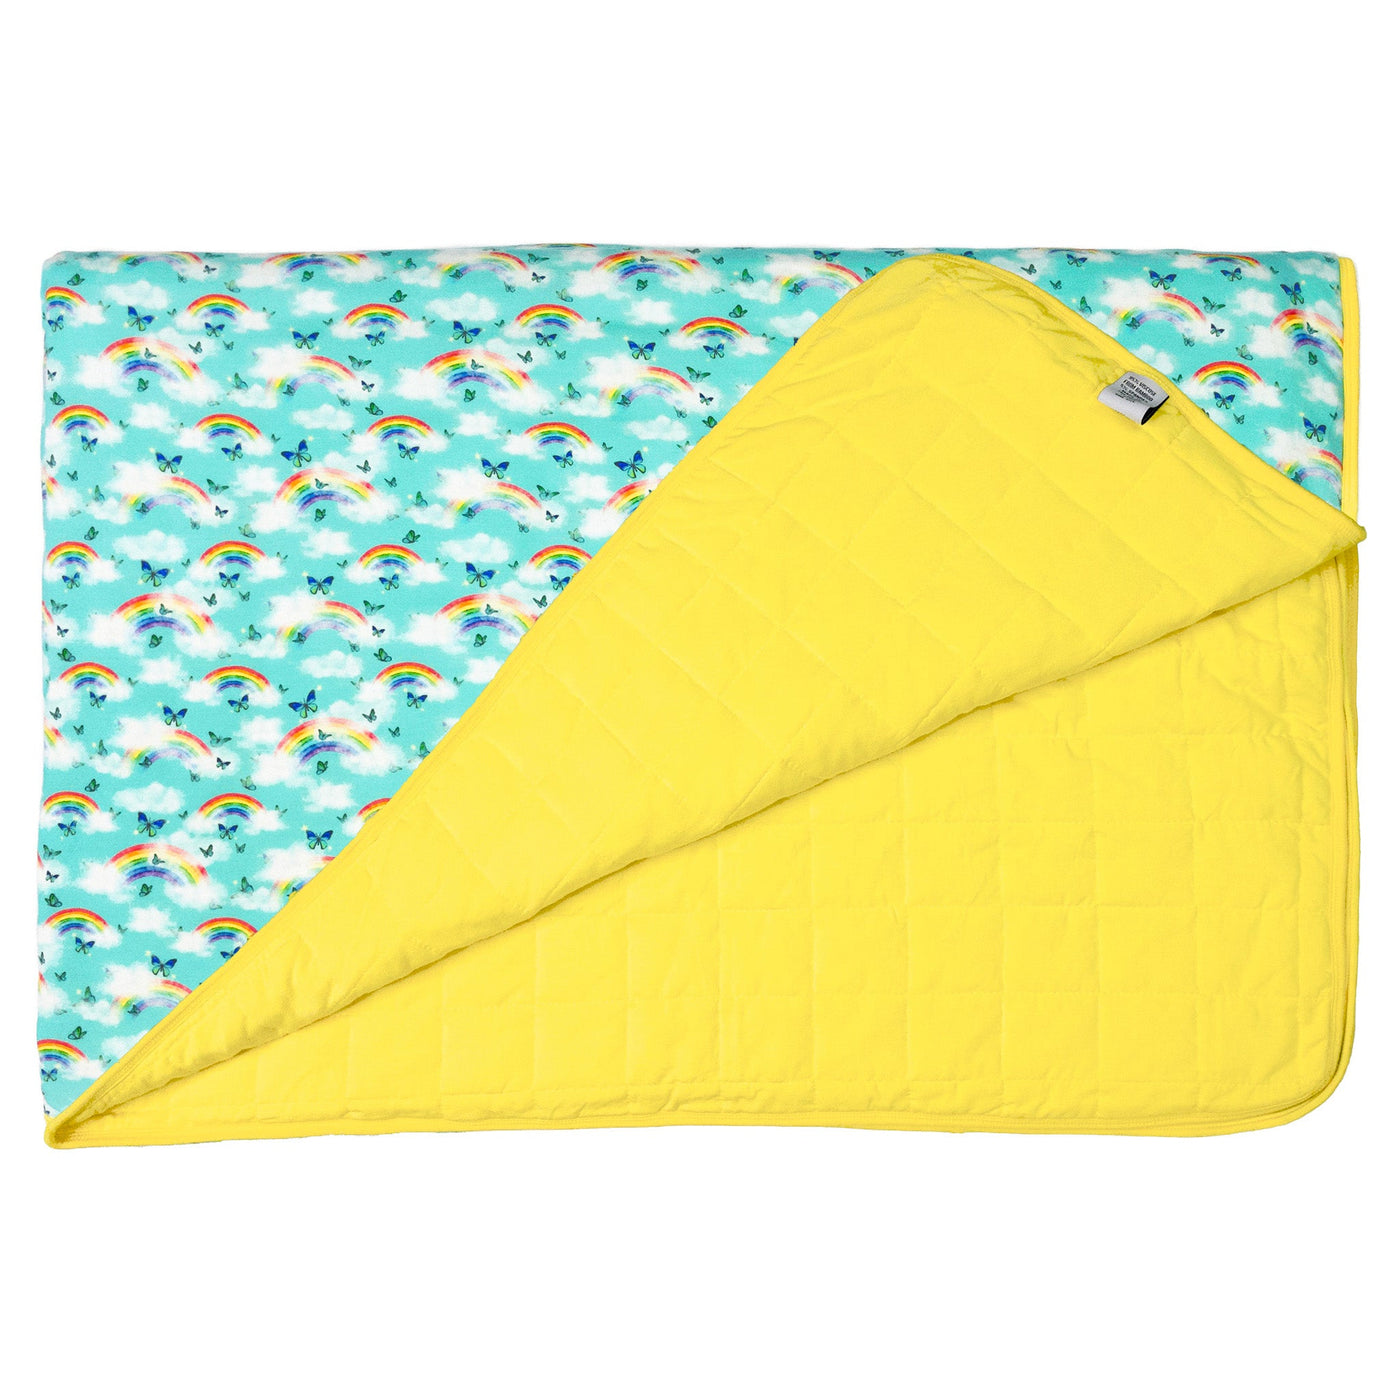 Over the Rainbow & Butterflies Quilted Toddler Blanket - Free Birdees